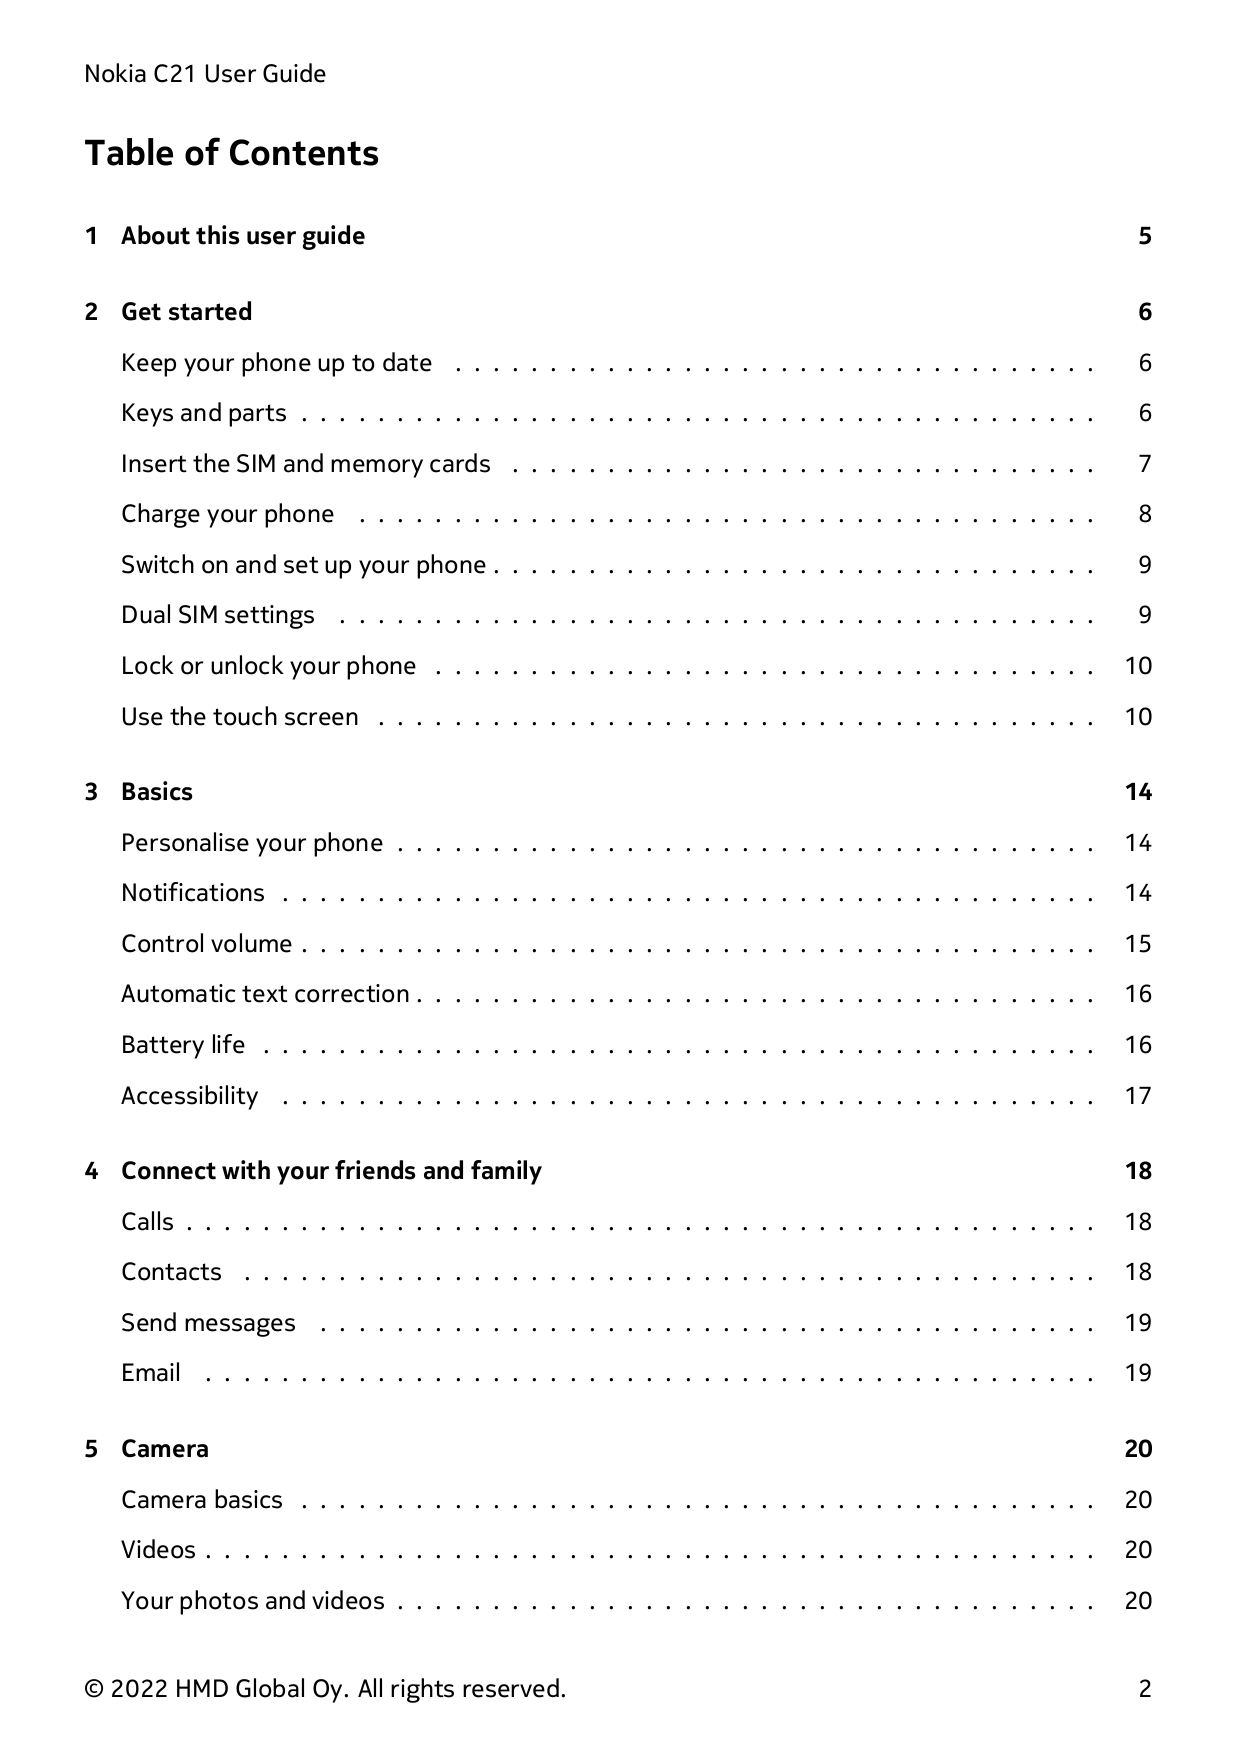 Nokia C21 User GuideTable of Contents1 About this user guide52 Get started6Keep your phone up to date . . . . . . . . . . . . . 